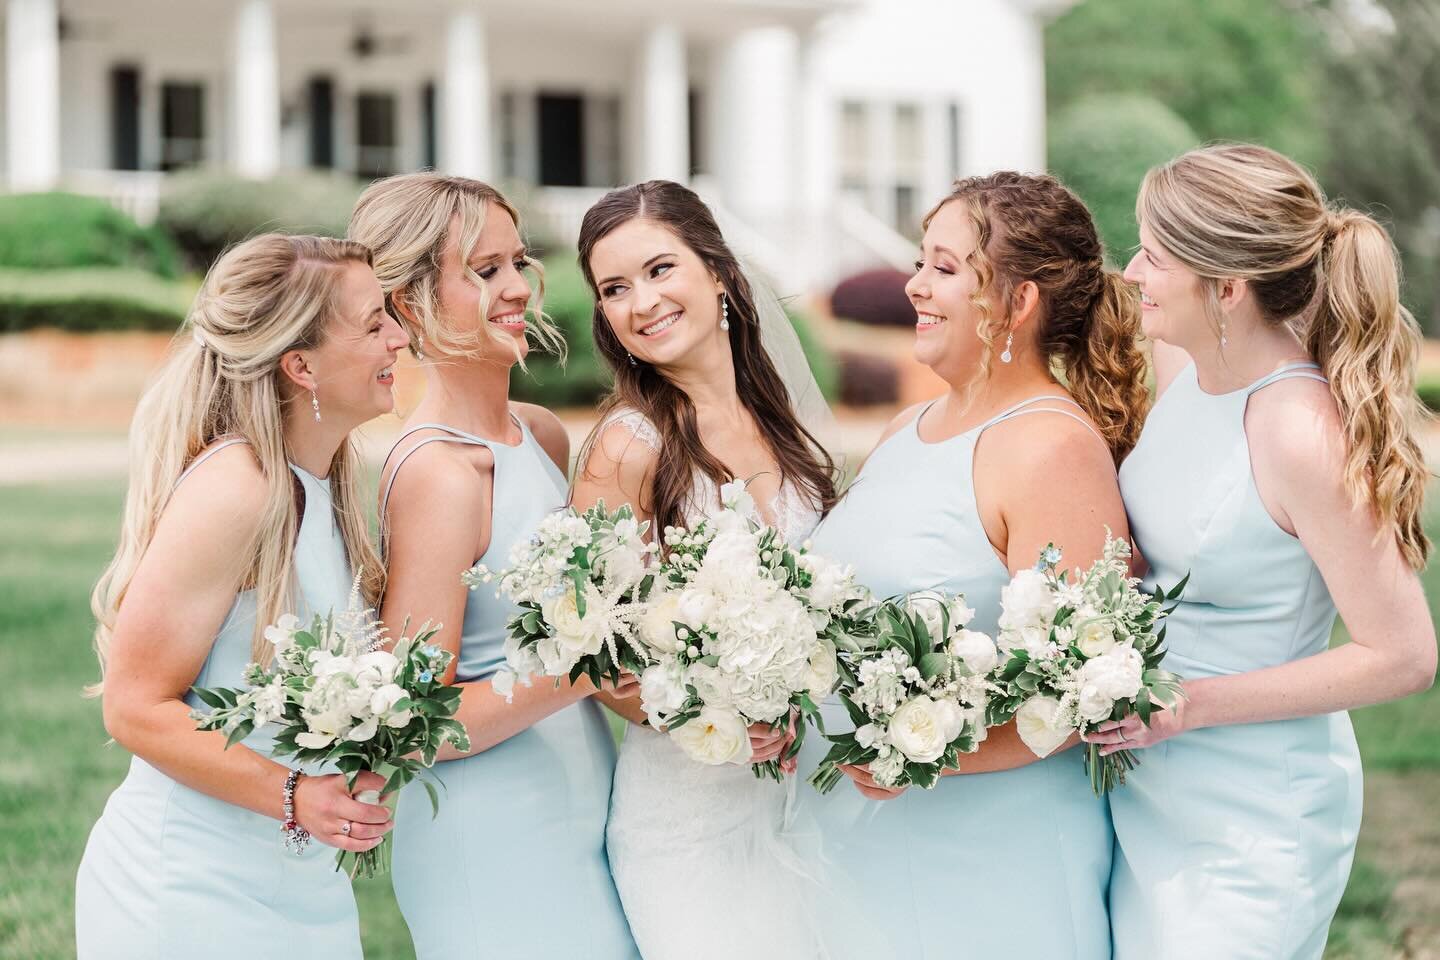 While our spring calendar is beginning to fill up, we still have a few fall dates available!! We would love to hear from you! 

www.audreyherron.com/contact 

#audreyherron #audreyherronphotography #georgiaweddingphotographer #athensweddingphotograph